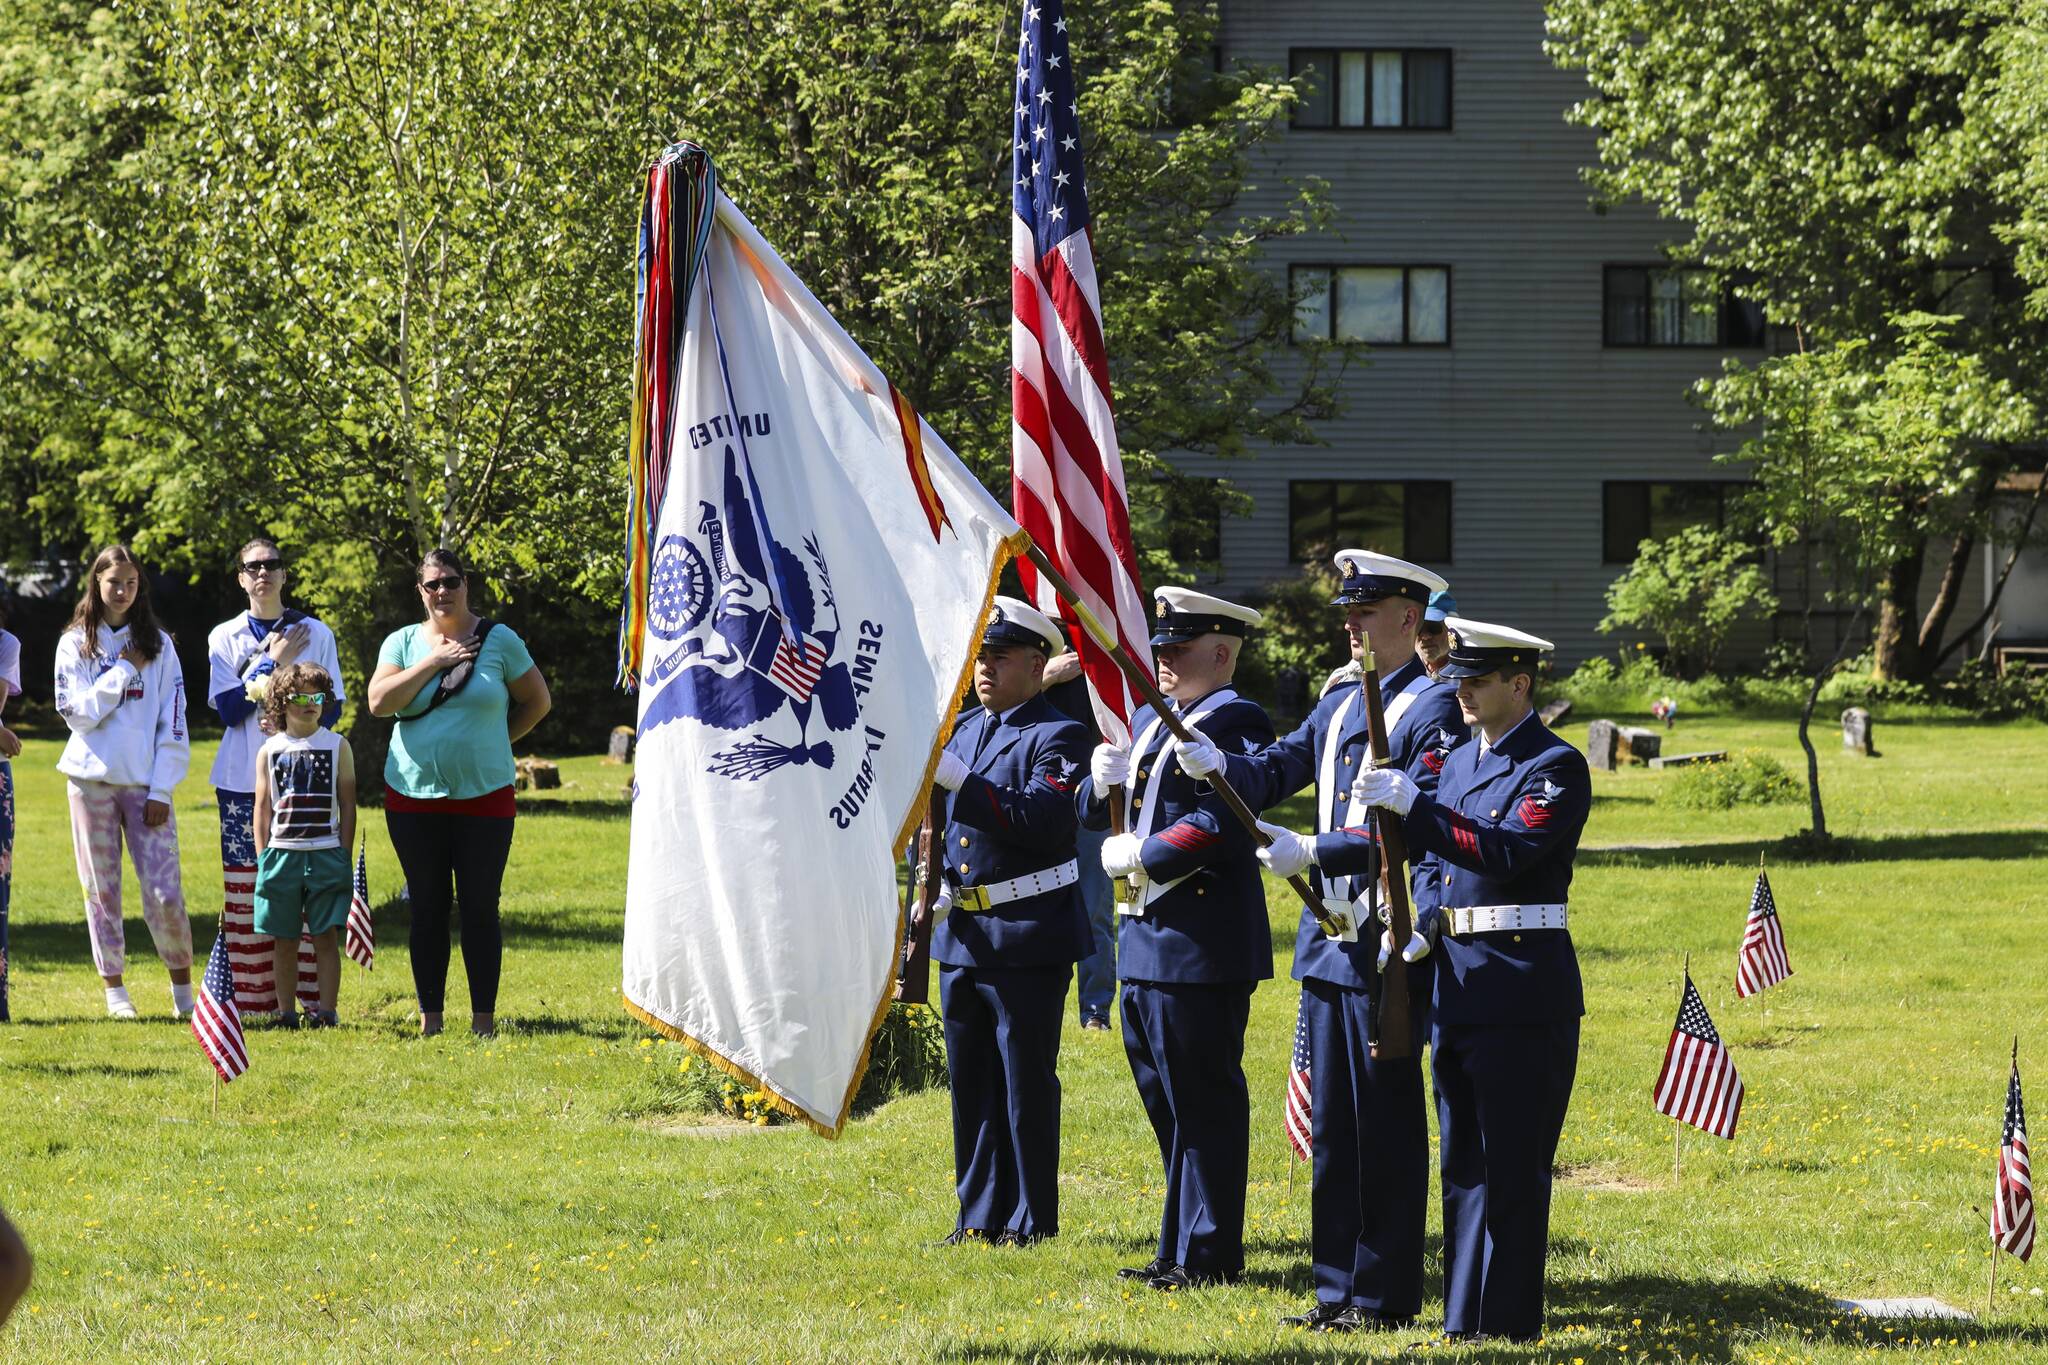 Michael S. Lockett / Juneau Empire 
A Coast Guard color guard presents the colors during a Memorial Day ceremony held by the Veterans of Foreign Wars at Evergreen Cemetery on Monday.